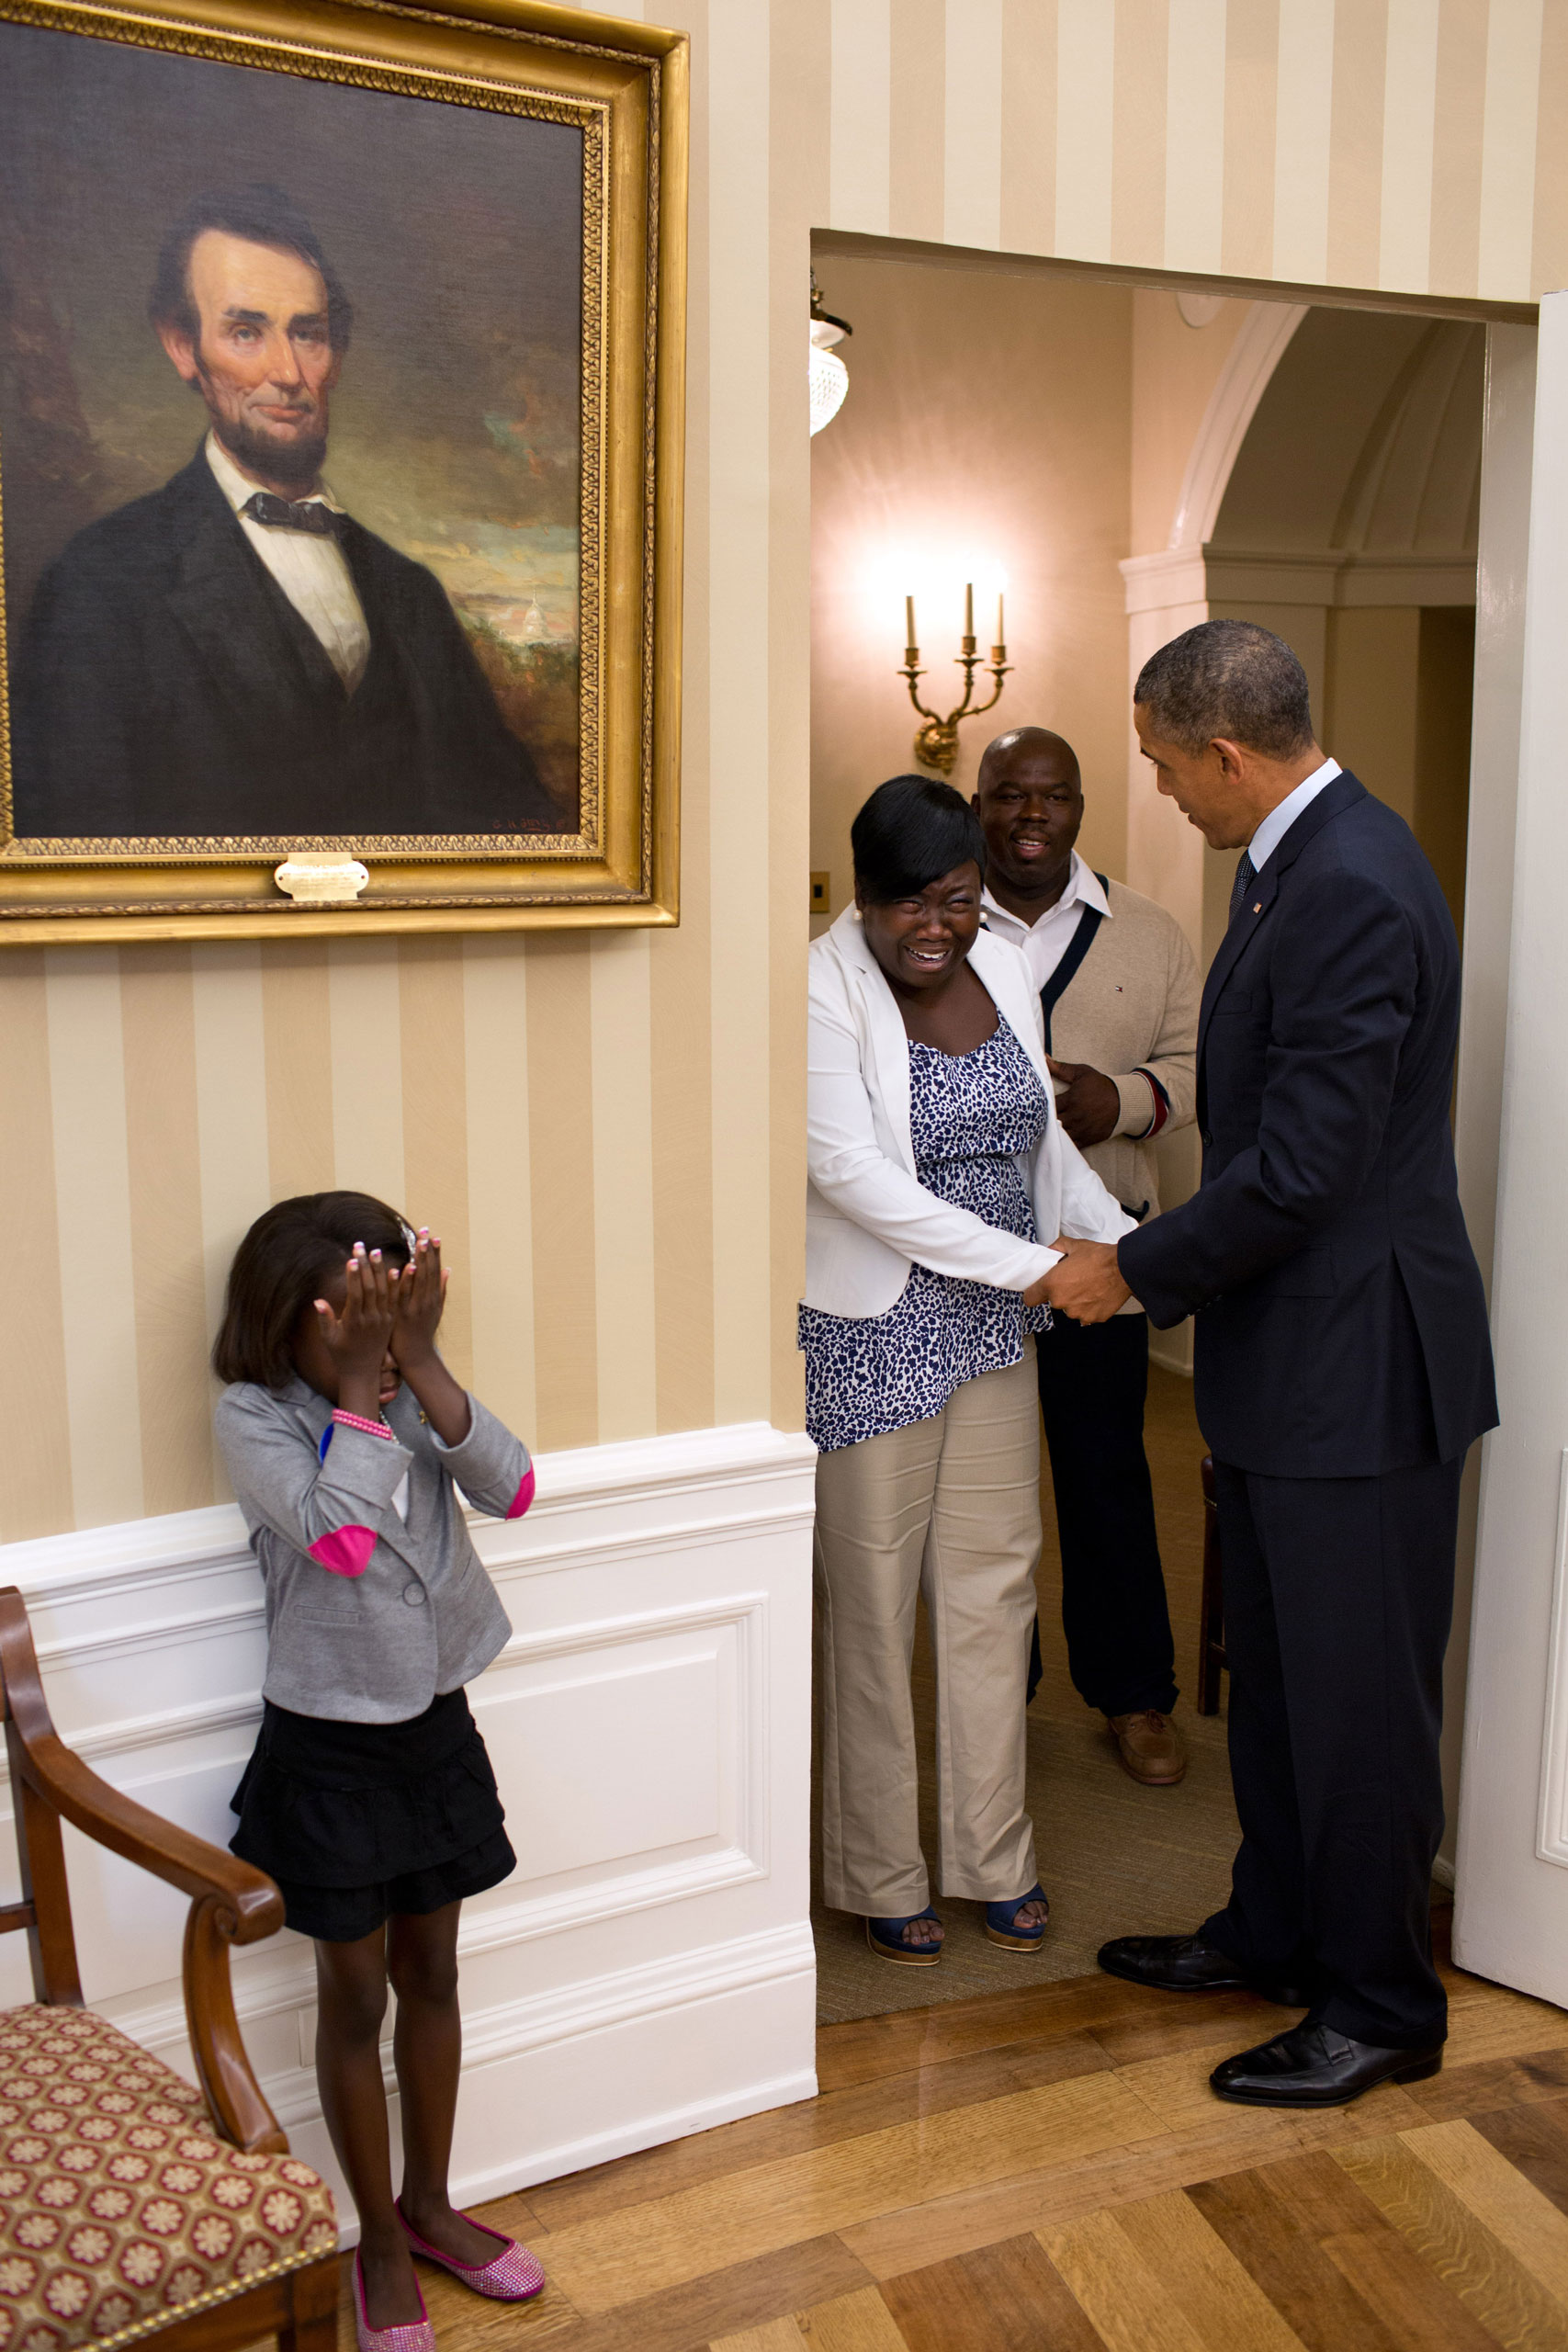 Eight-year old Make-A-Wish child Janiya Penny reacts after meeting President Barack Obama as he welcomes her family to the Oval Office, Aug. 8, 2012.